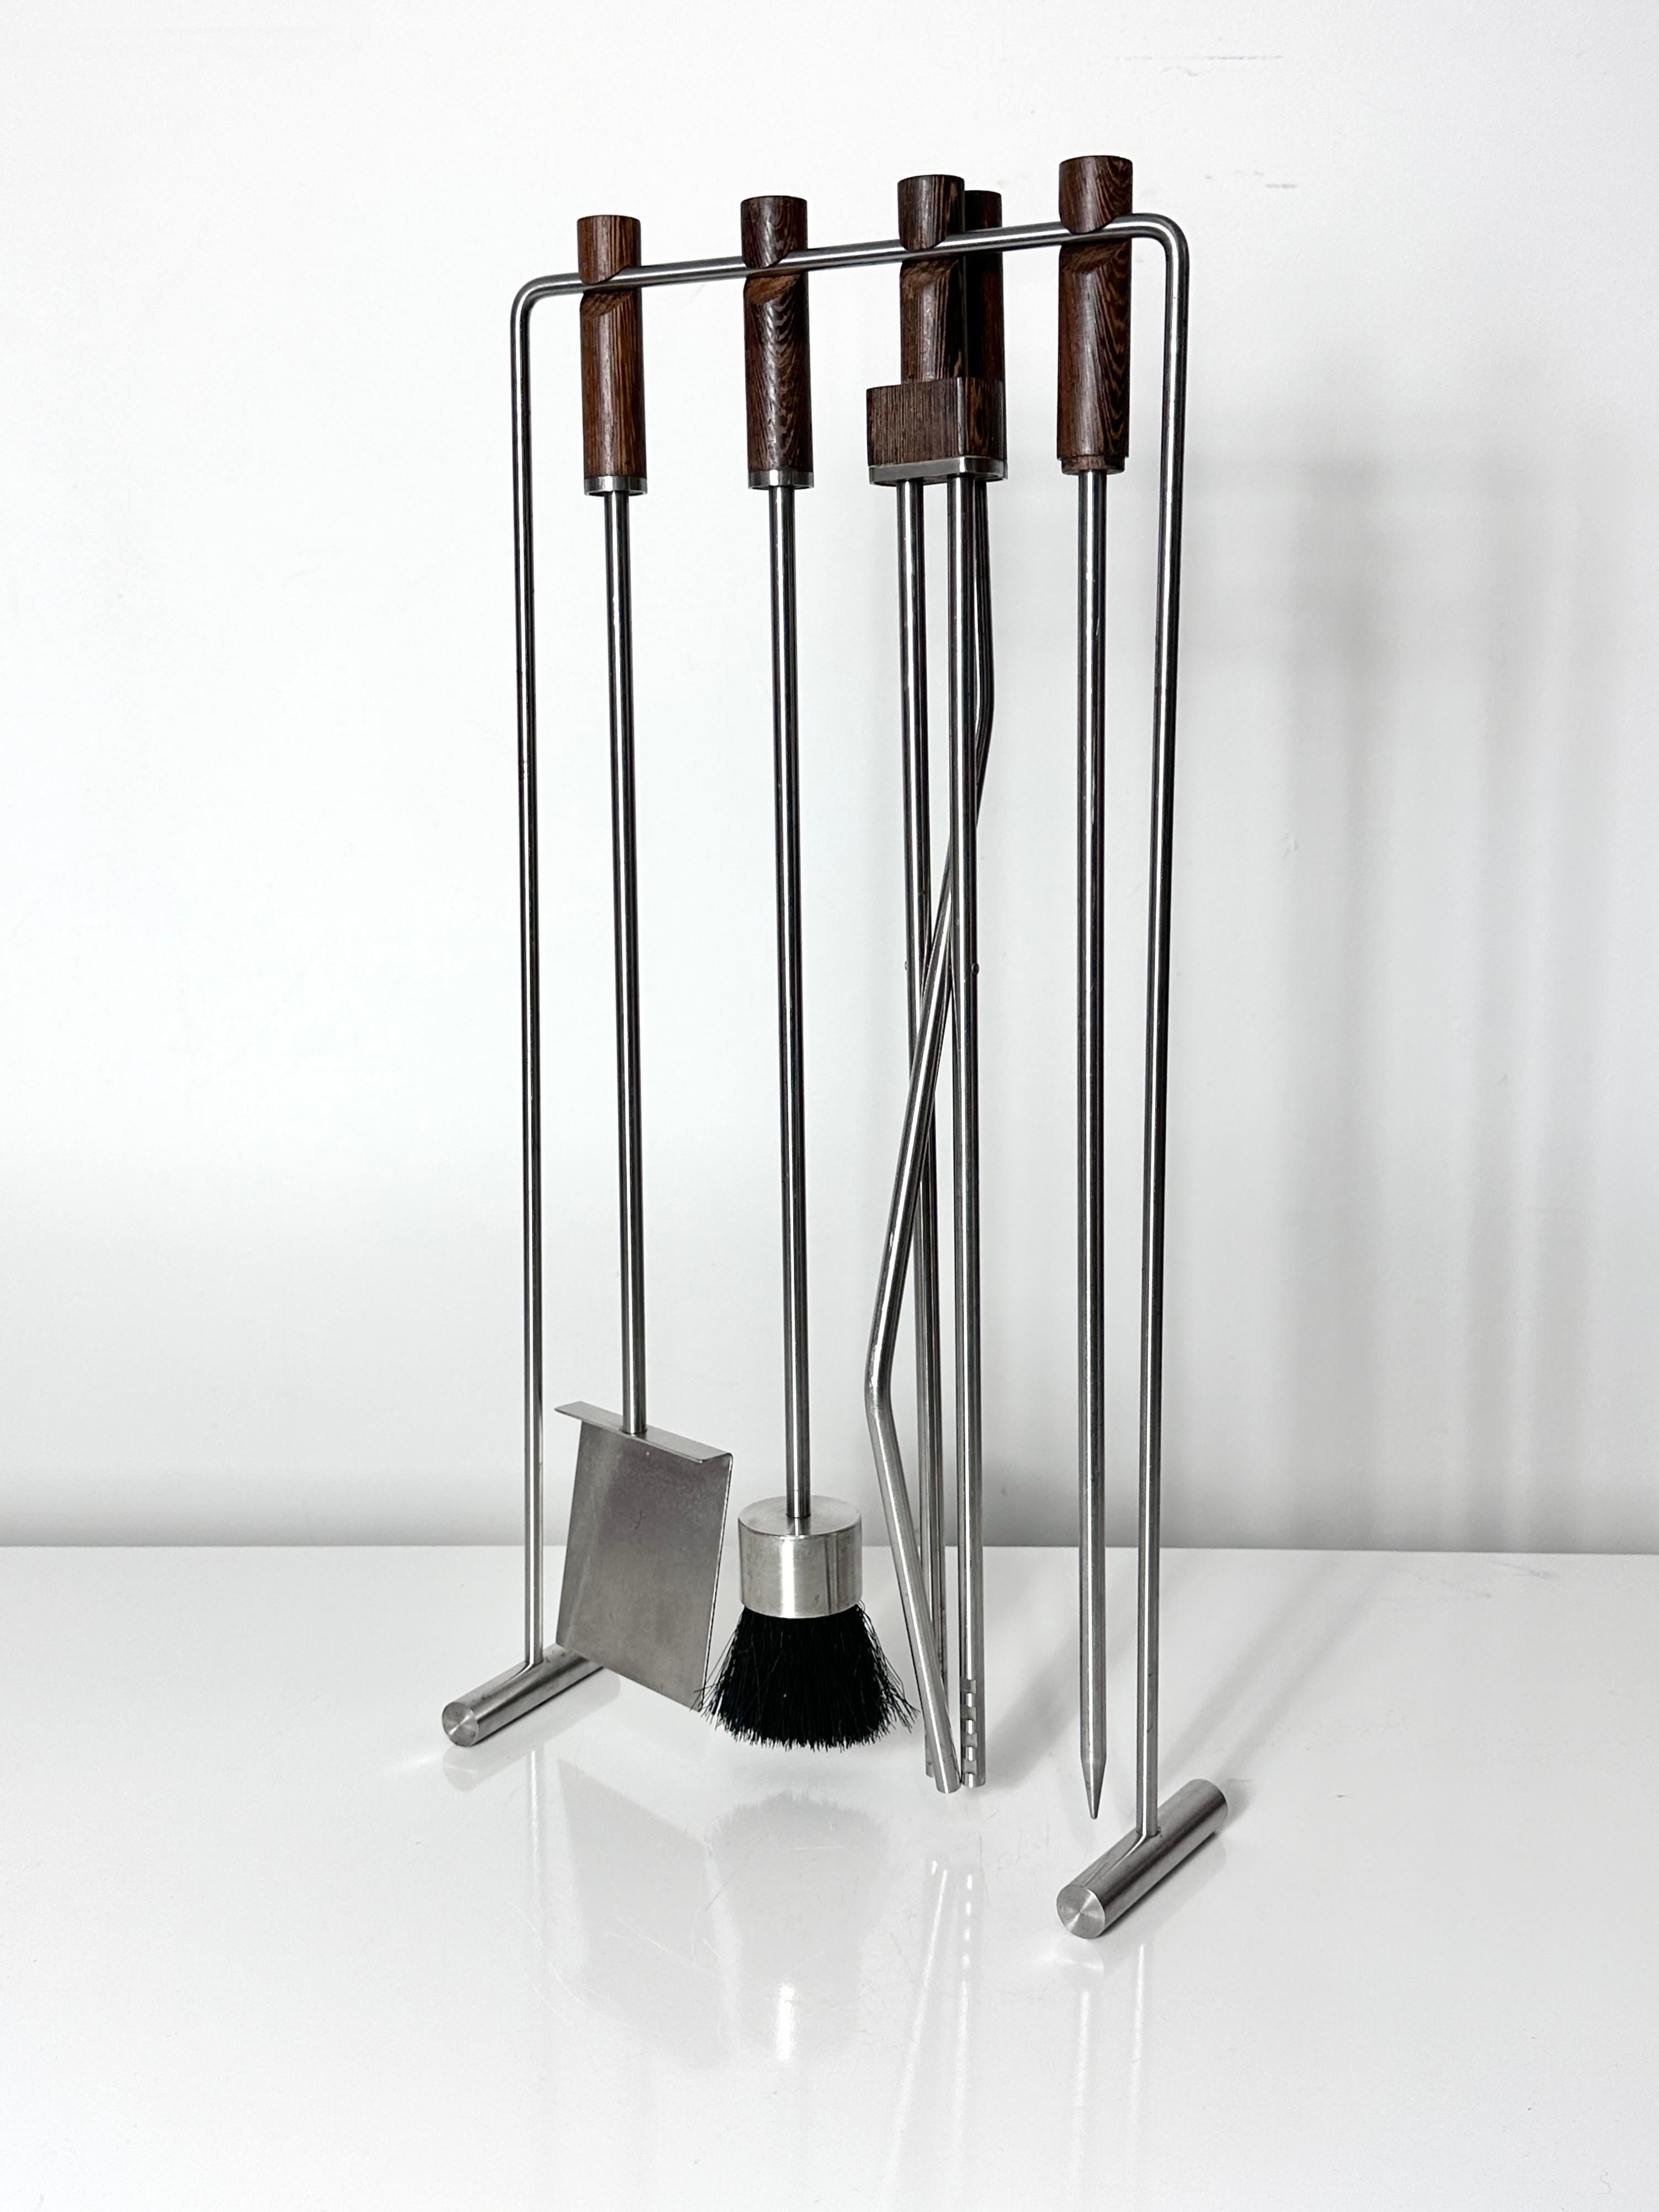 Mid-Century Modern Mid Century Modernist Set Fireplace Tools Stainless Steel & Wenge Circa 1970s For Sale